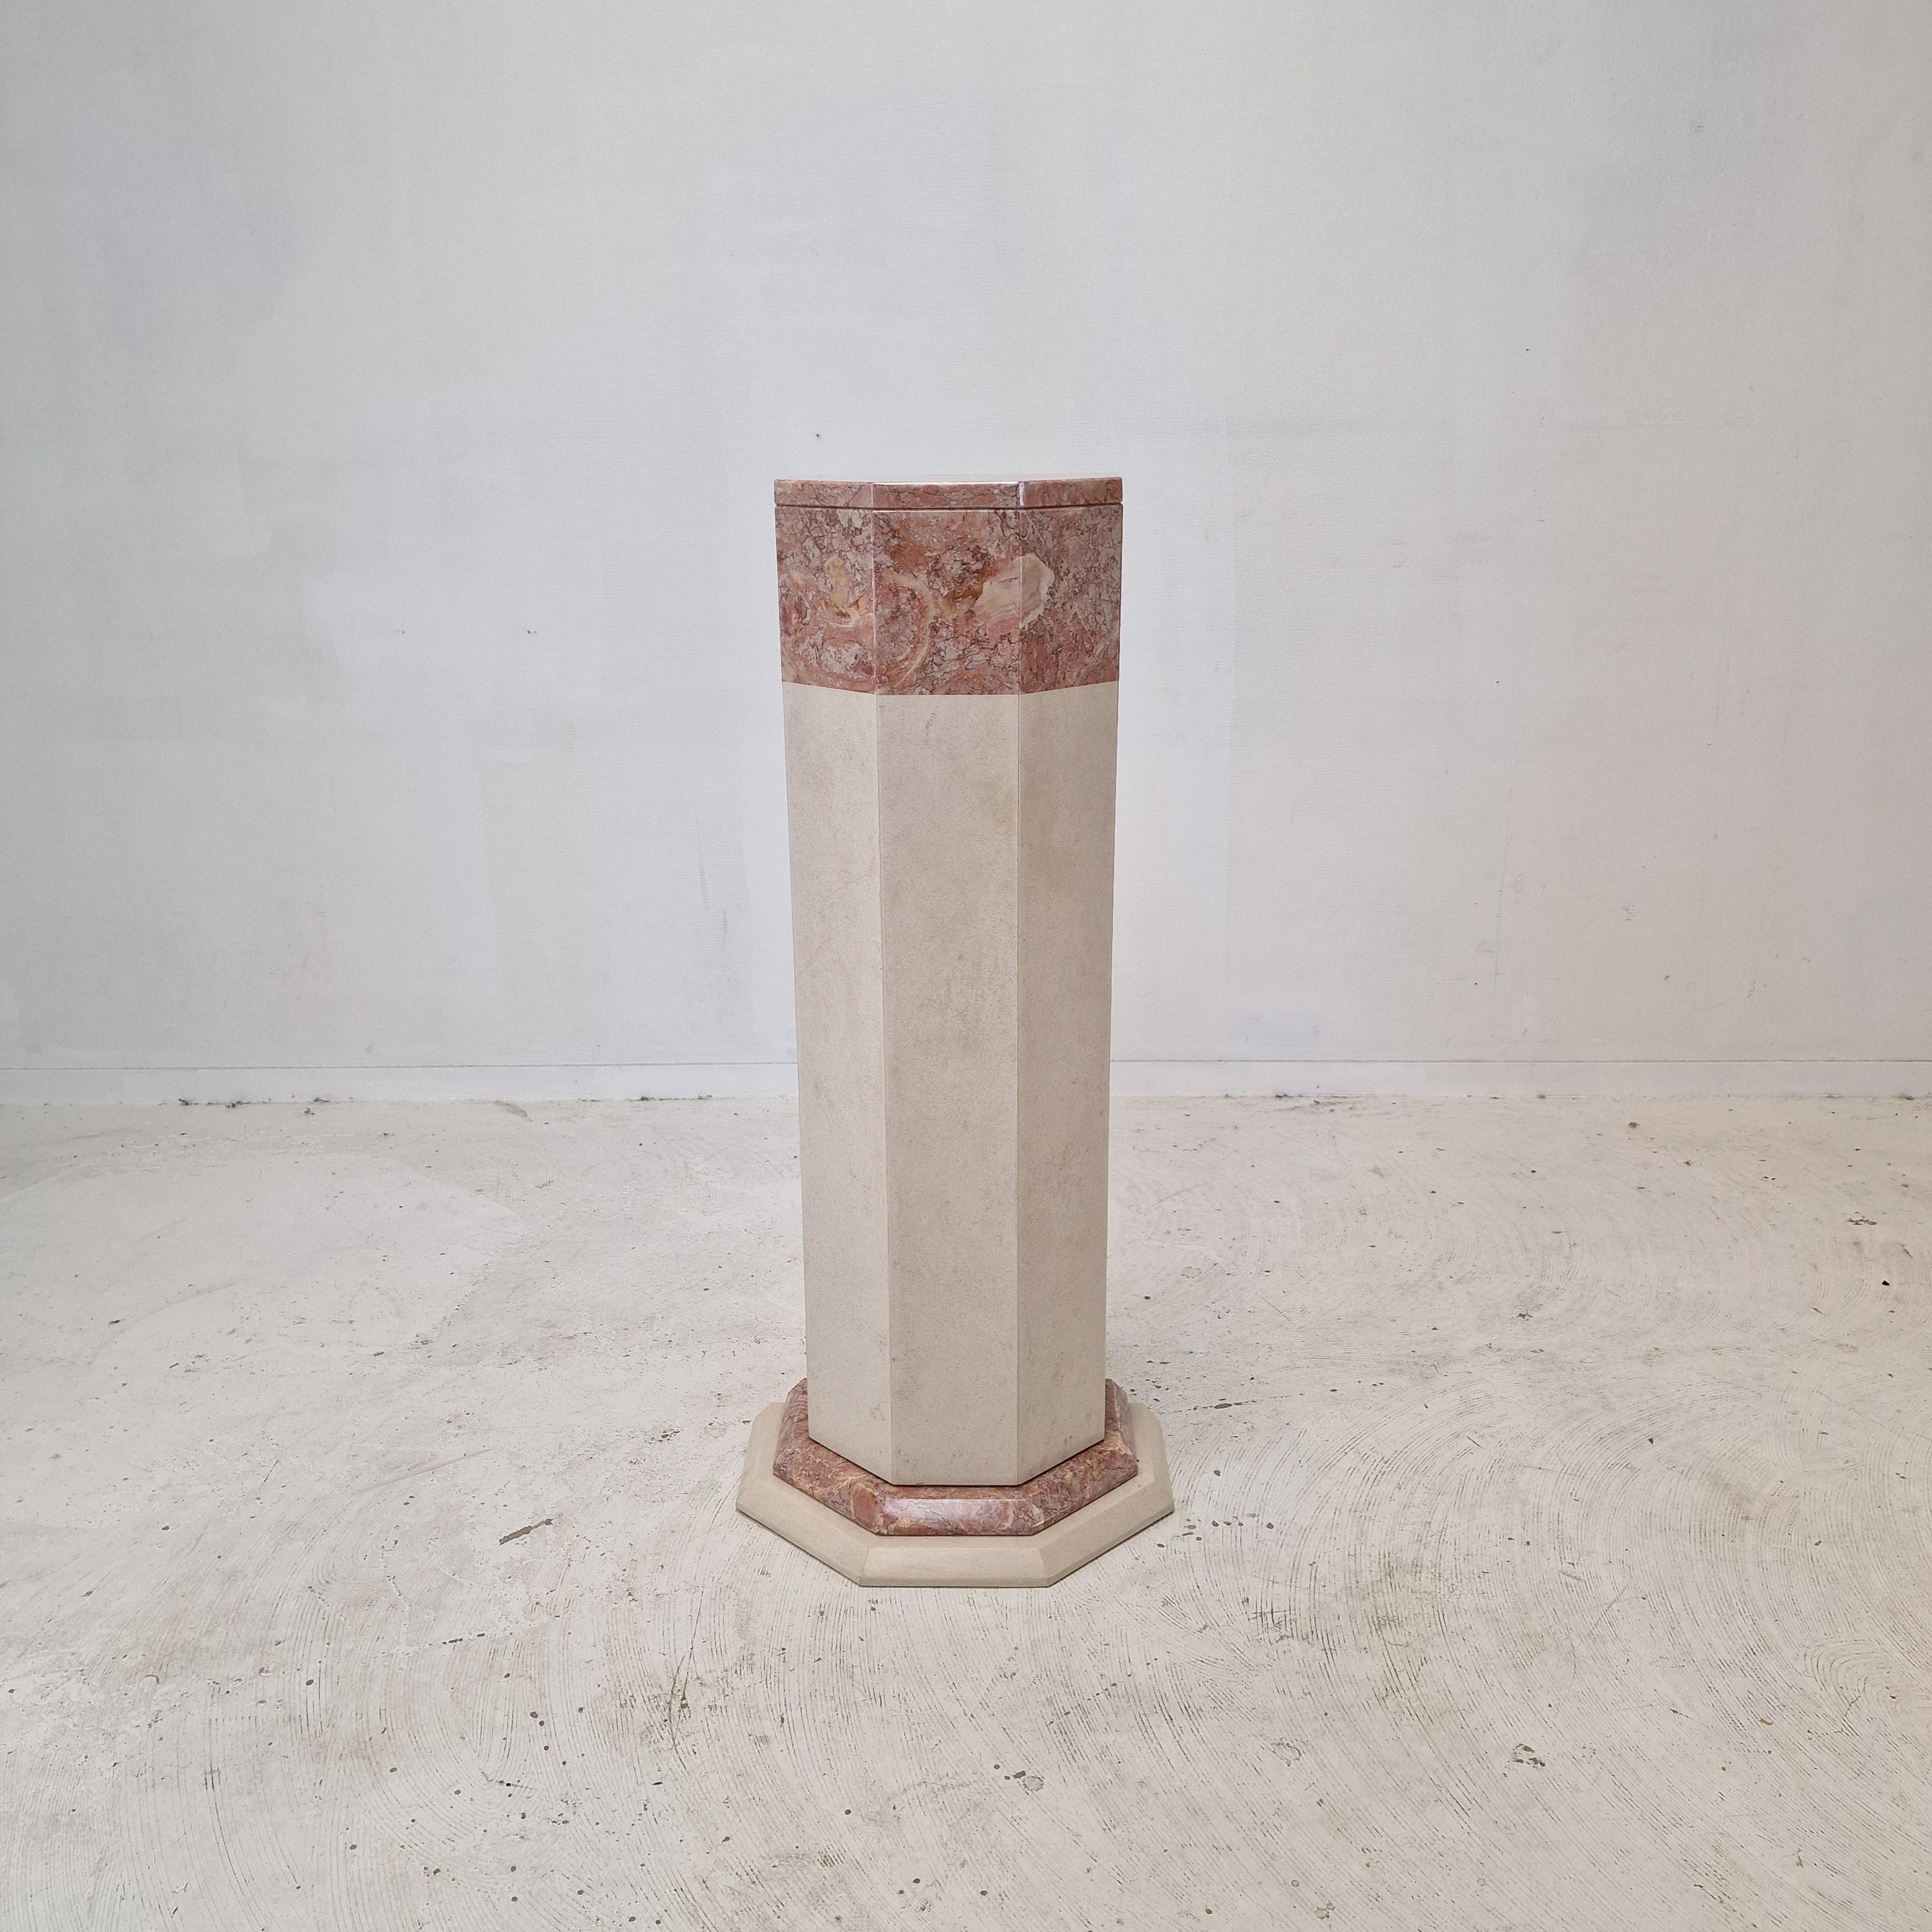 Italian pedestal, handcrafted out of marble, fabricated in the 1980s.
It can be used inside or outside the house.

It is made of beautiful marble.
Please take notice of the very nice patterns.

It has the normal traces of use, see the pictures.  